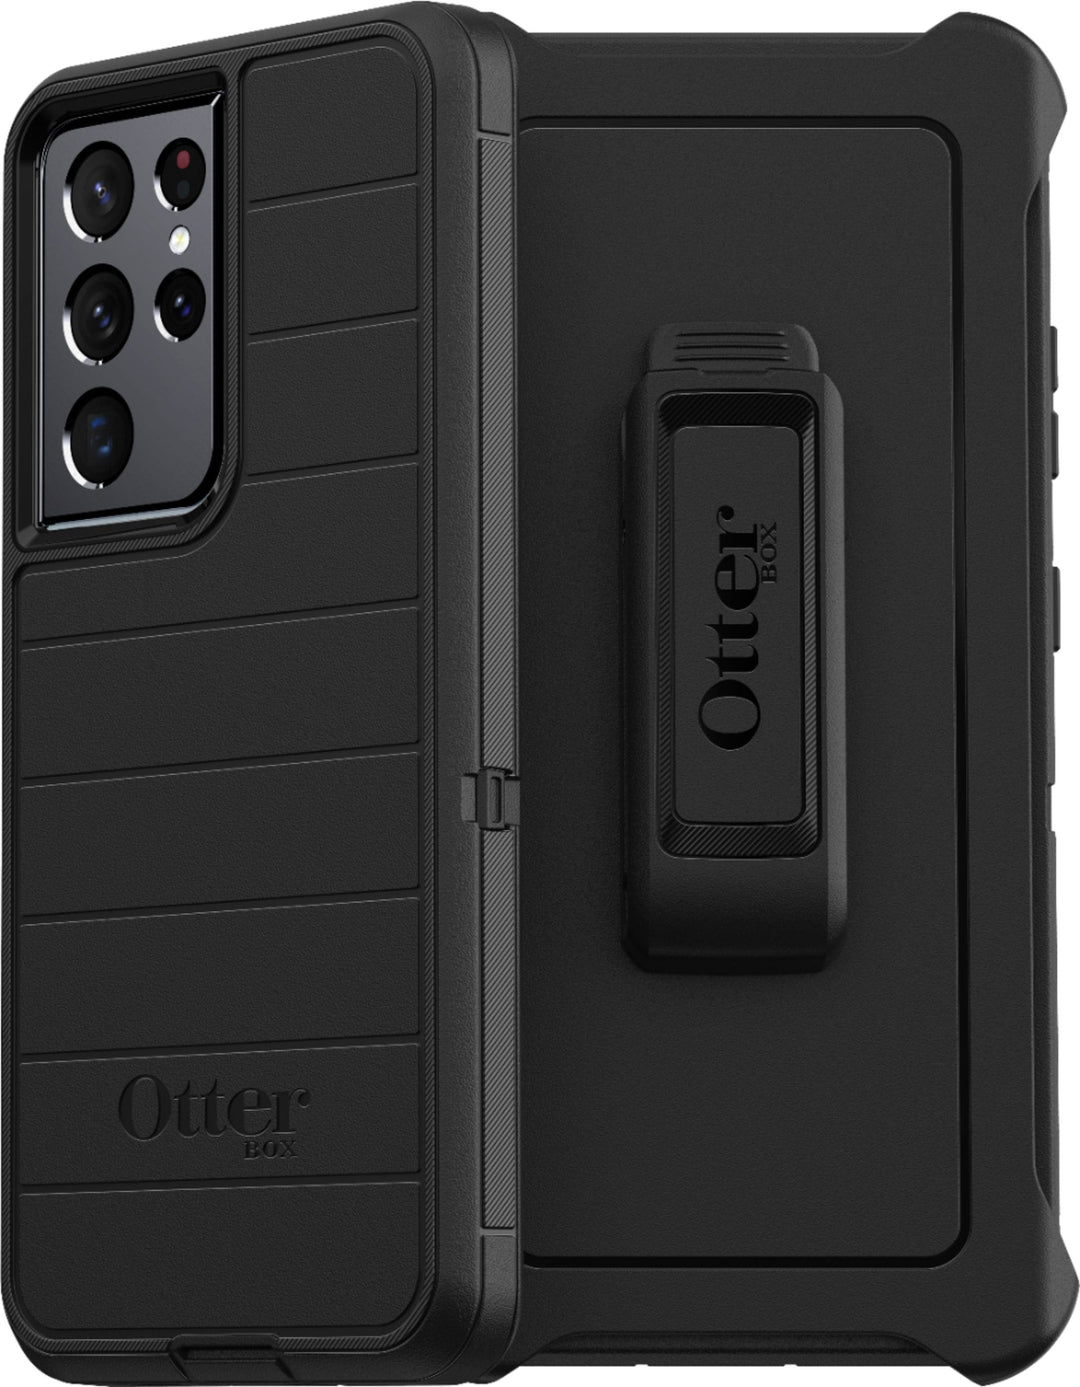 OtterBox - Defender Series Pro for Samsung Galaxy S21 Ultra 5G - Black_1